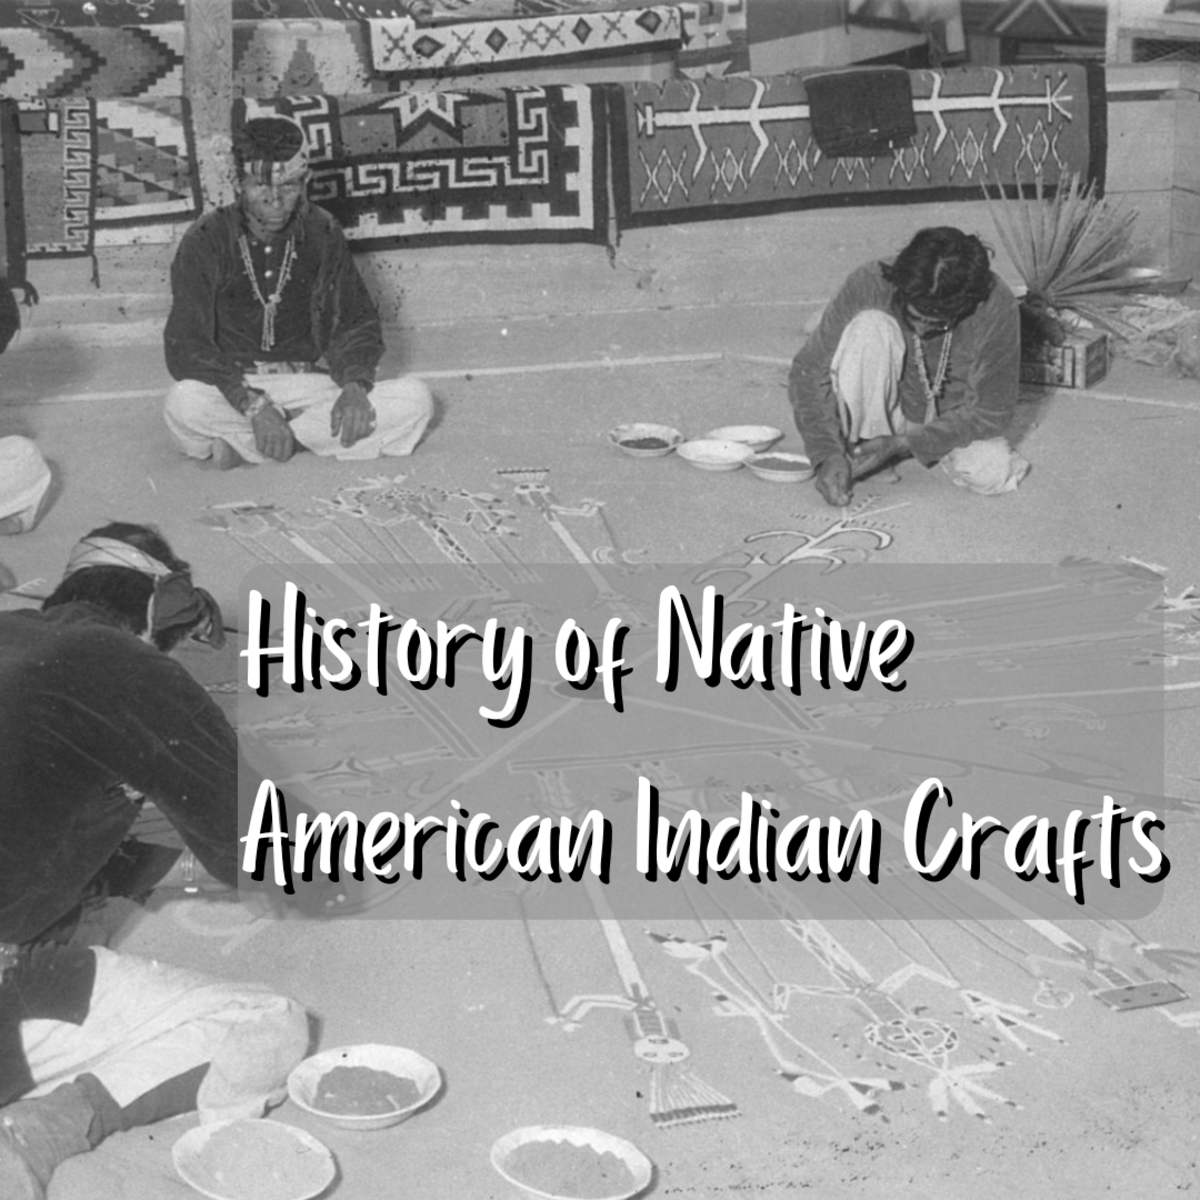 History of Native American Indian Crafts